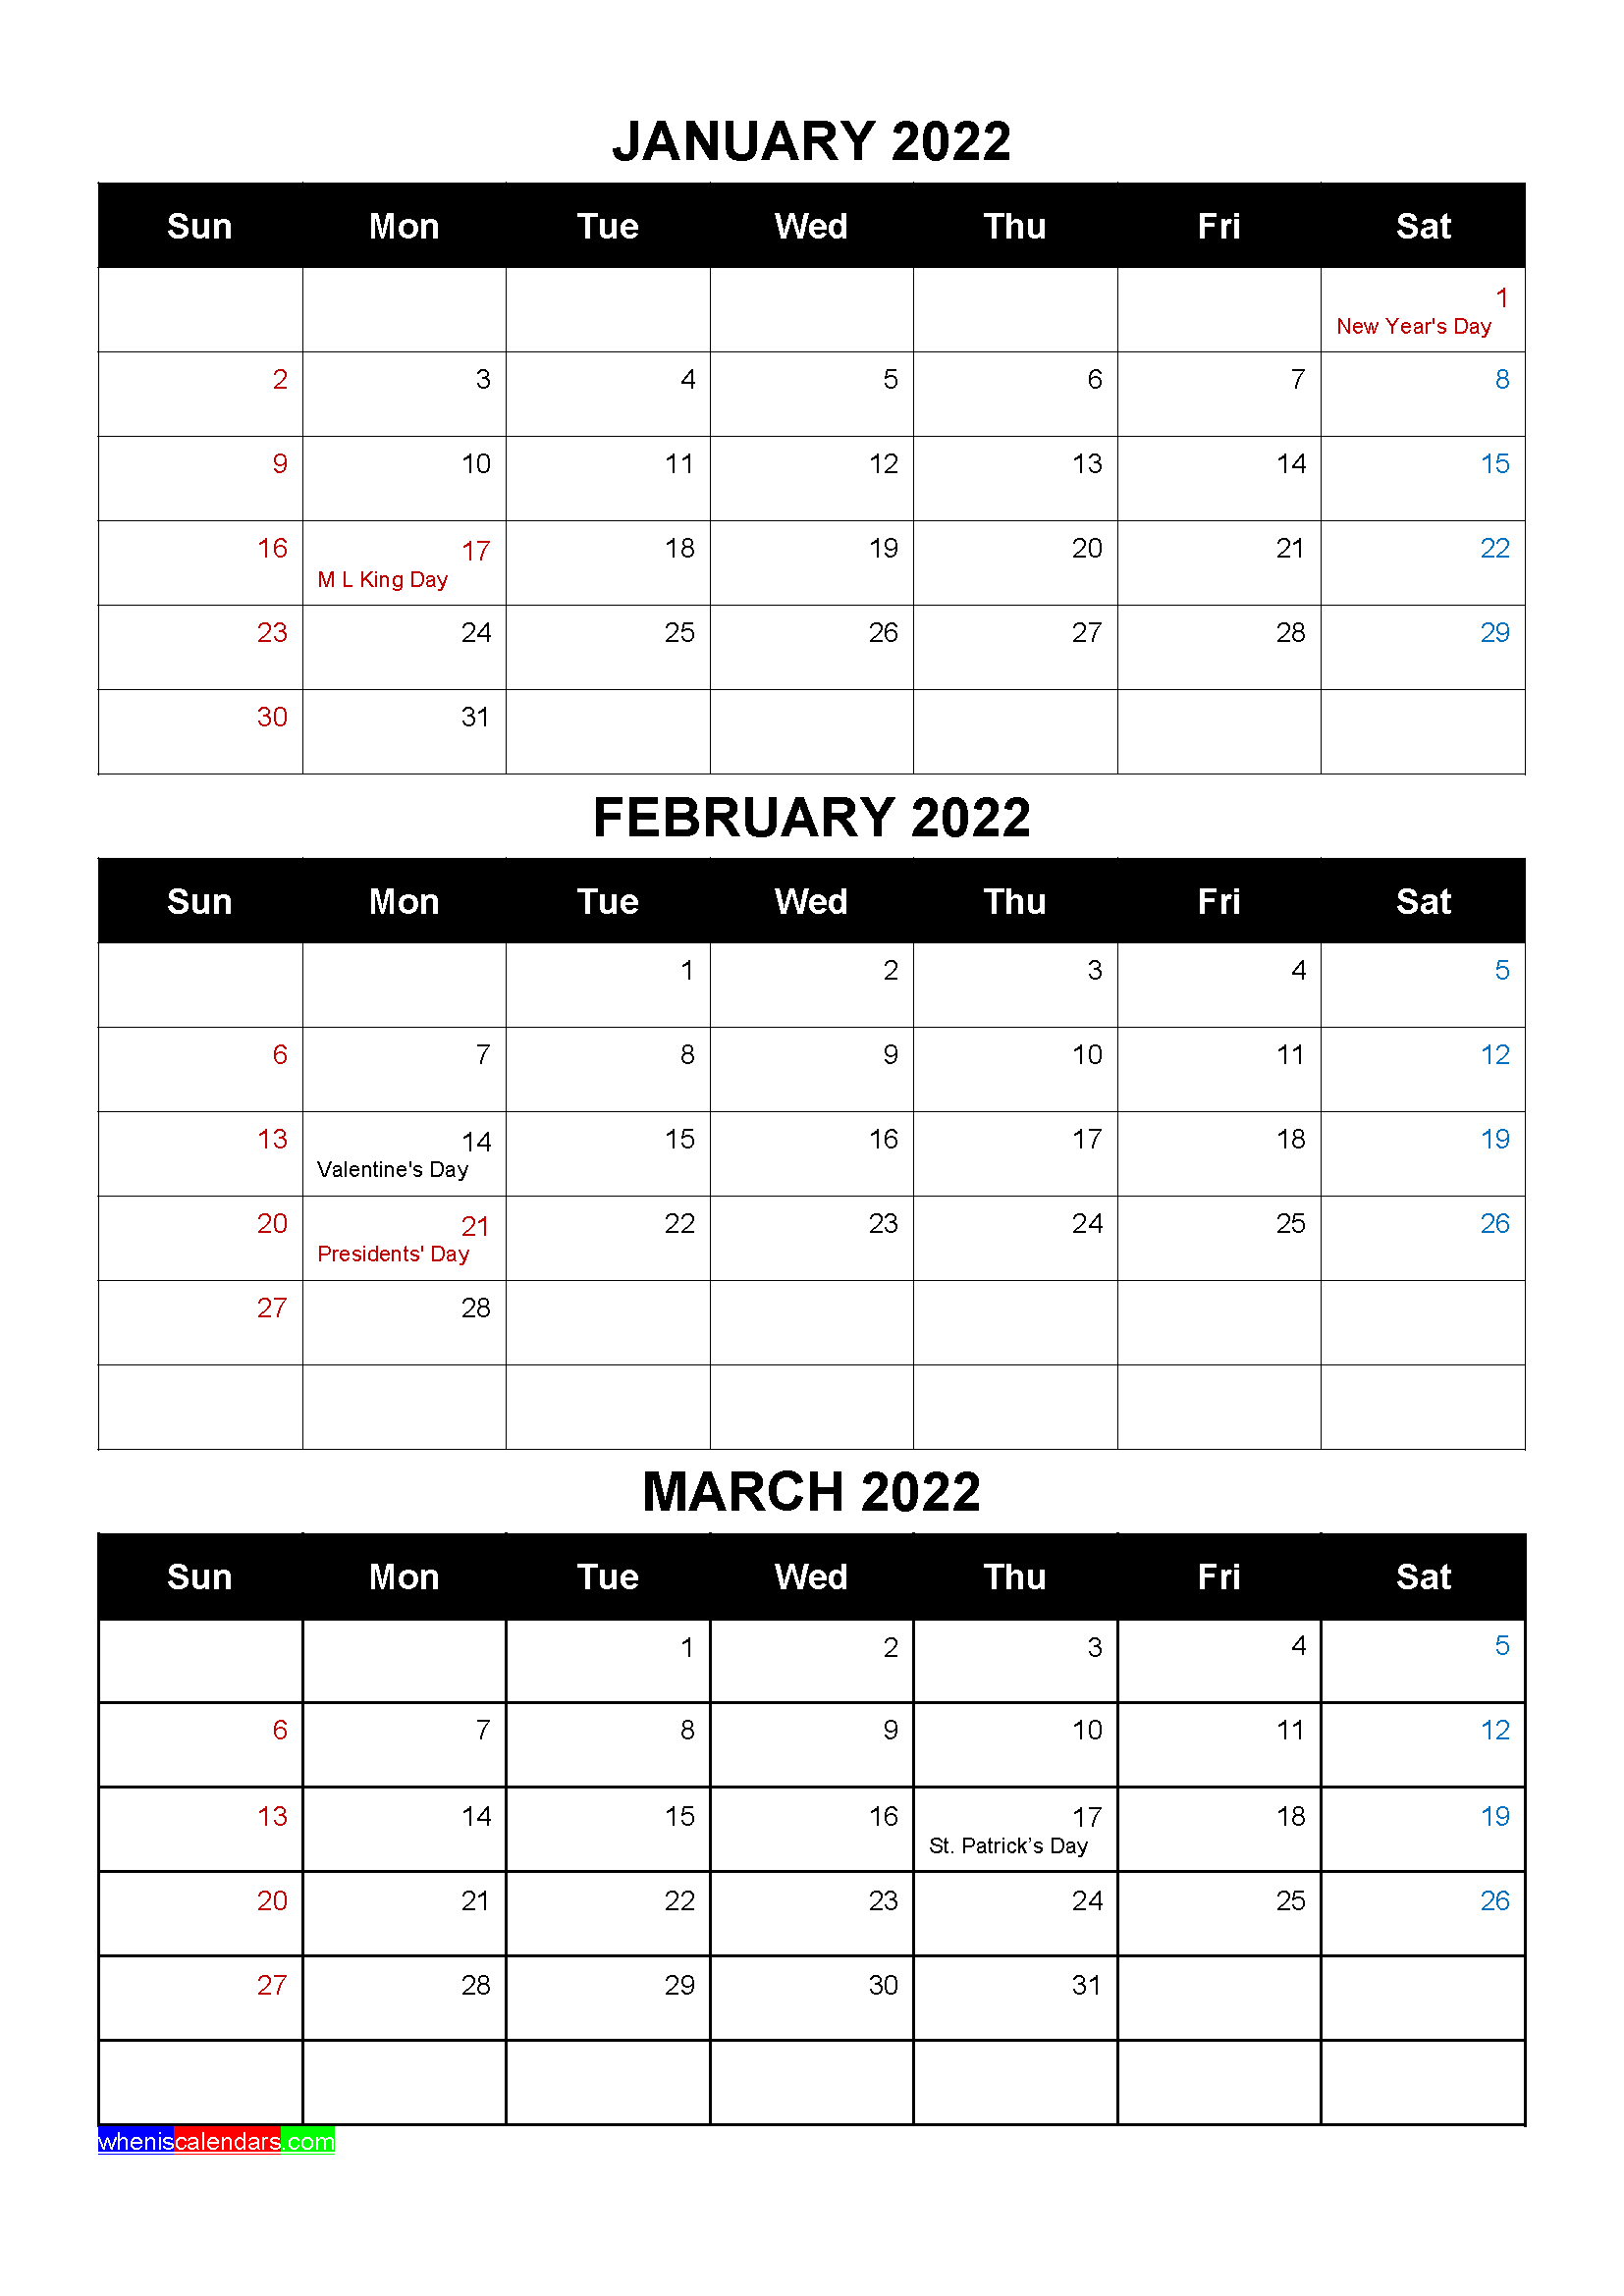 Free Calendar January February March 2022 With Holidays